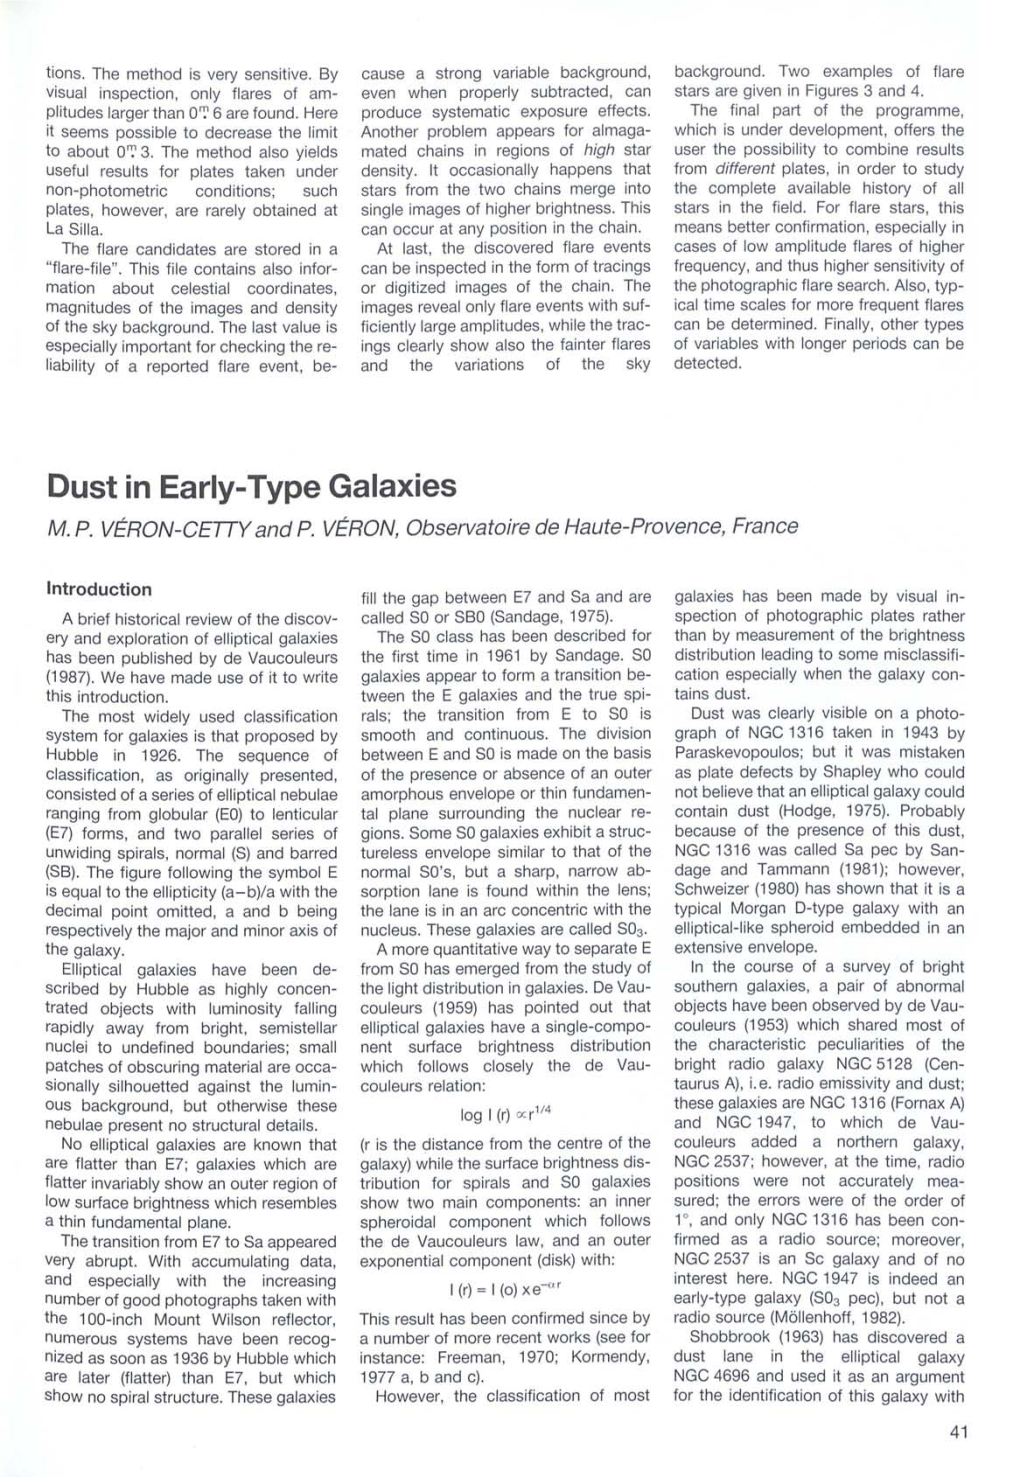 Dust in Early-Type Galaxies M